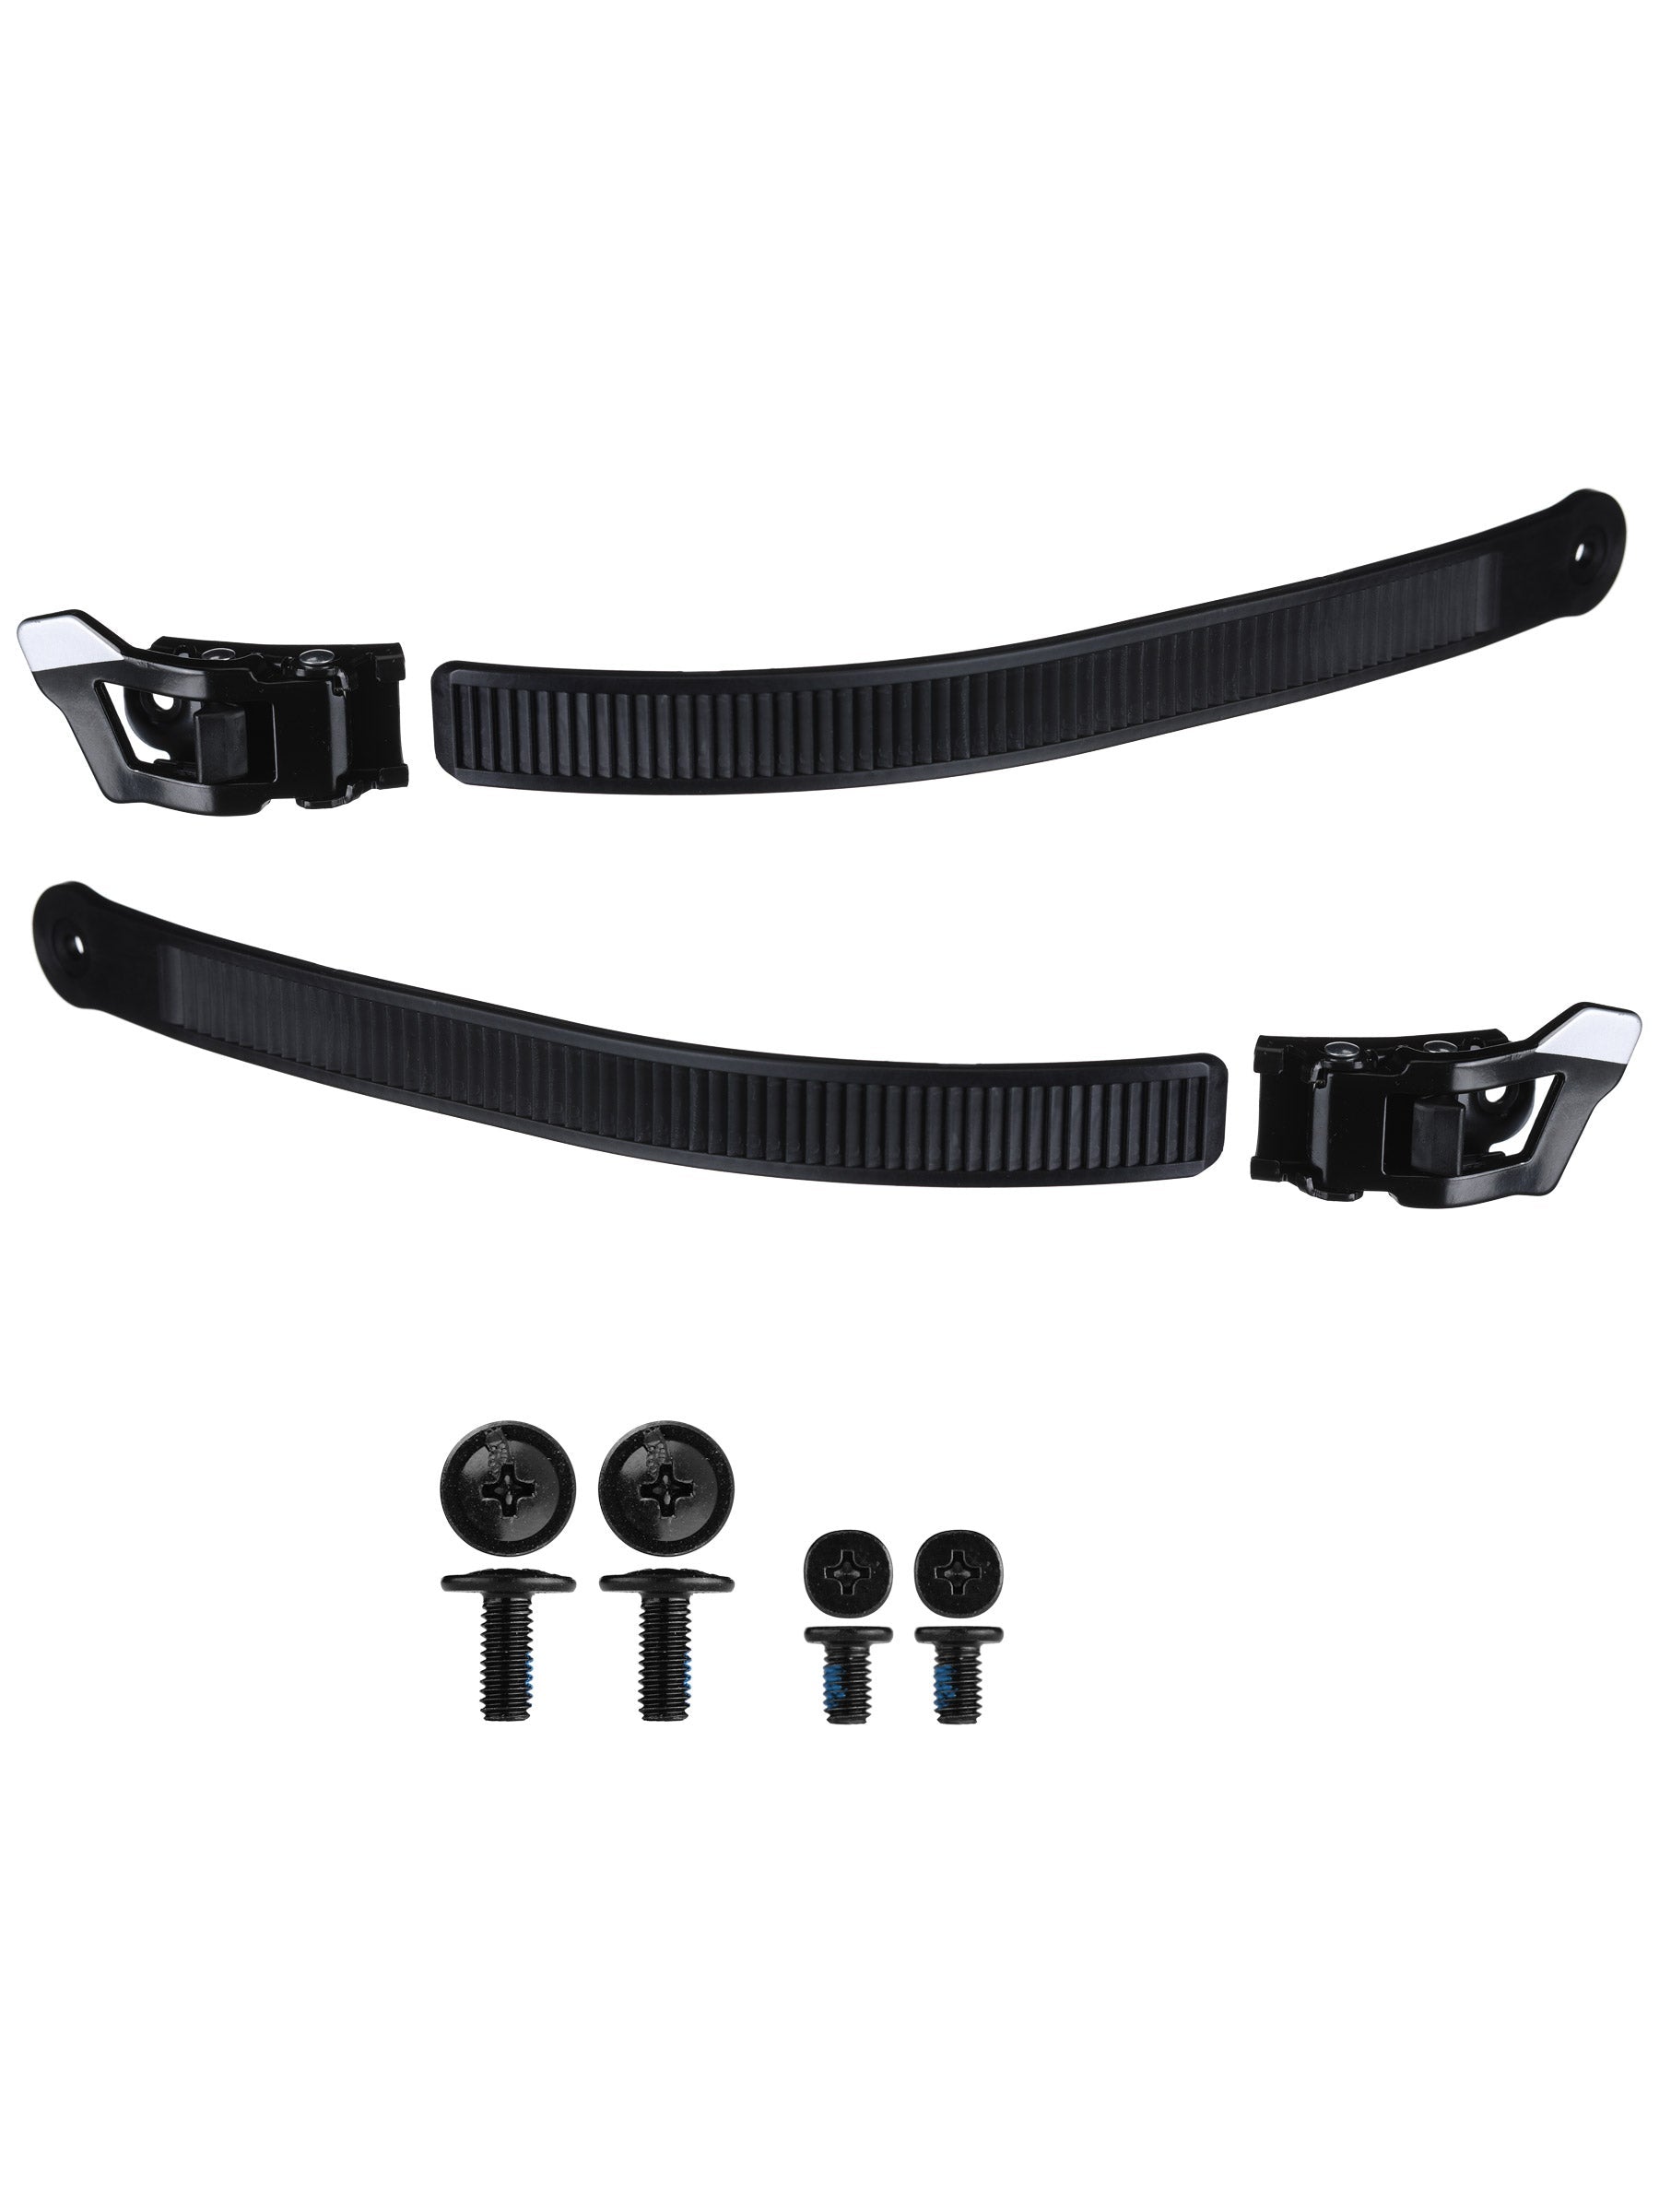 Rollerblade Endurace Upper Cuff Buckles and Straps